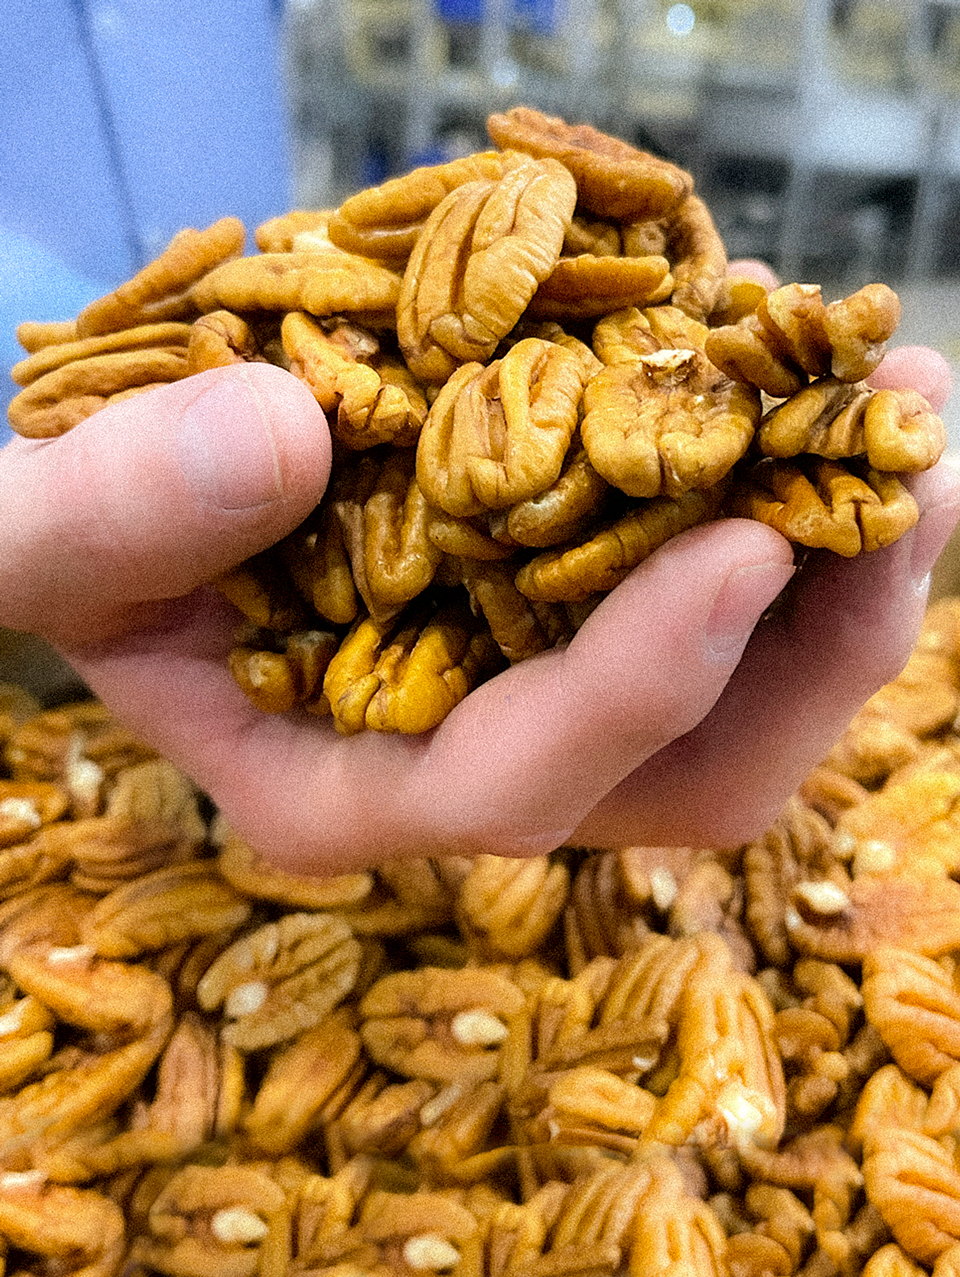 Pecan shipments up this year